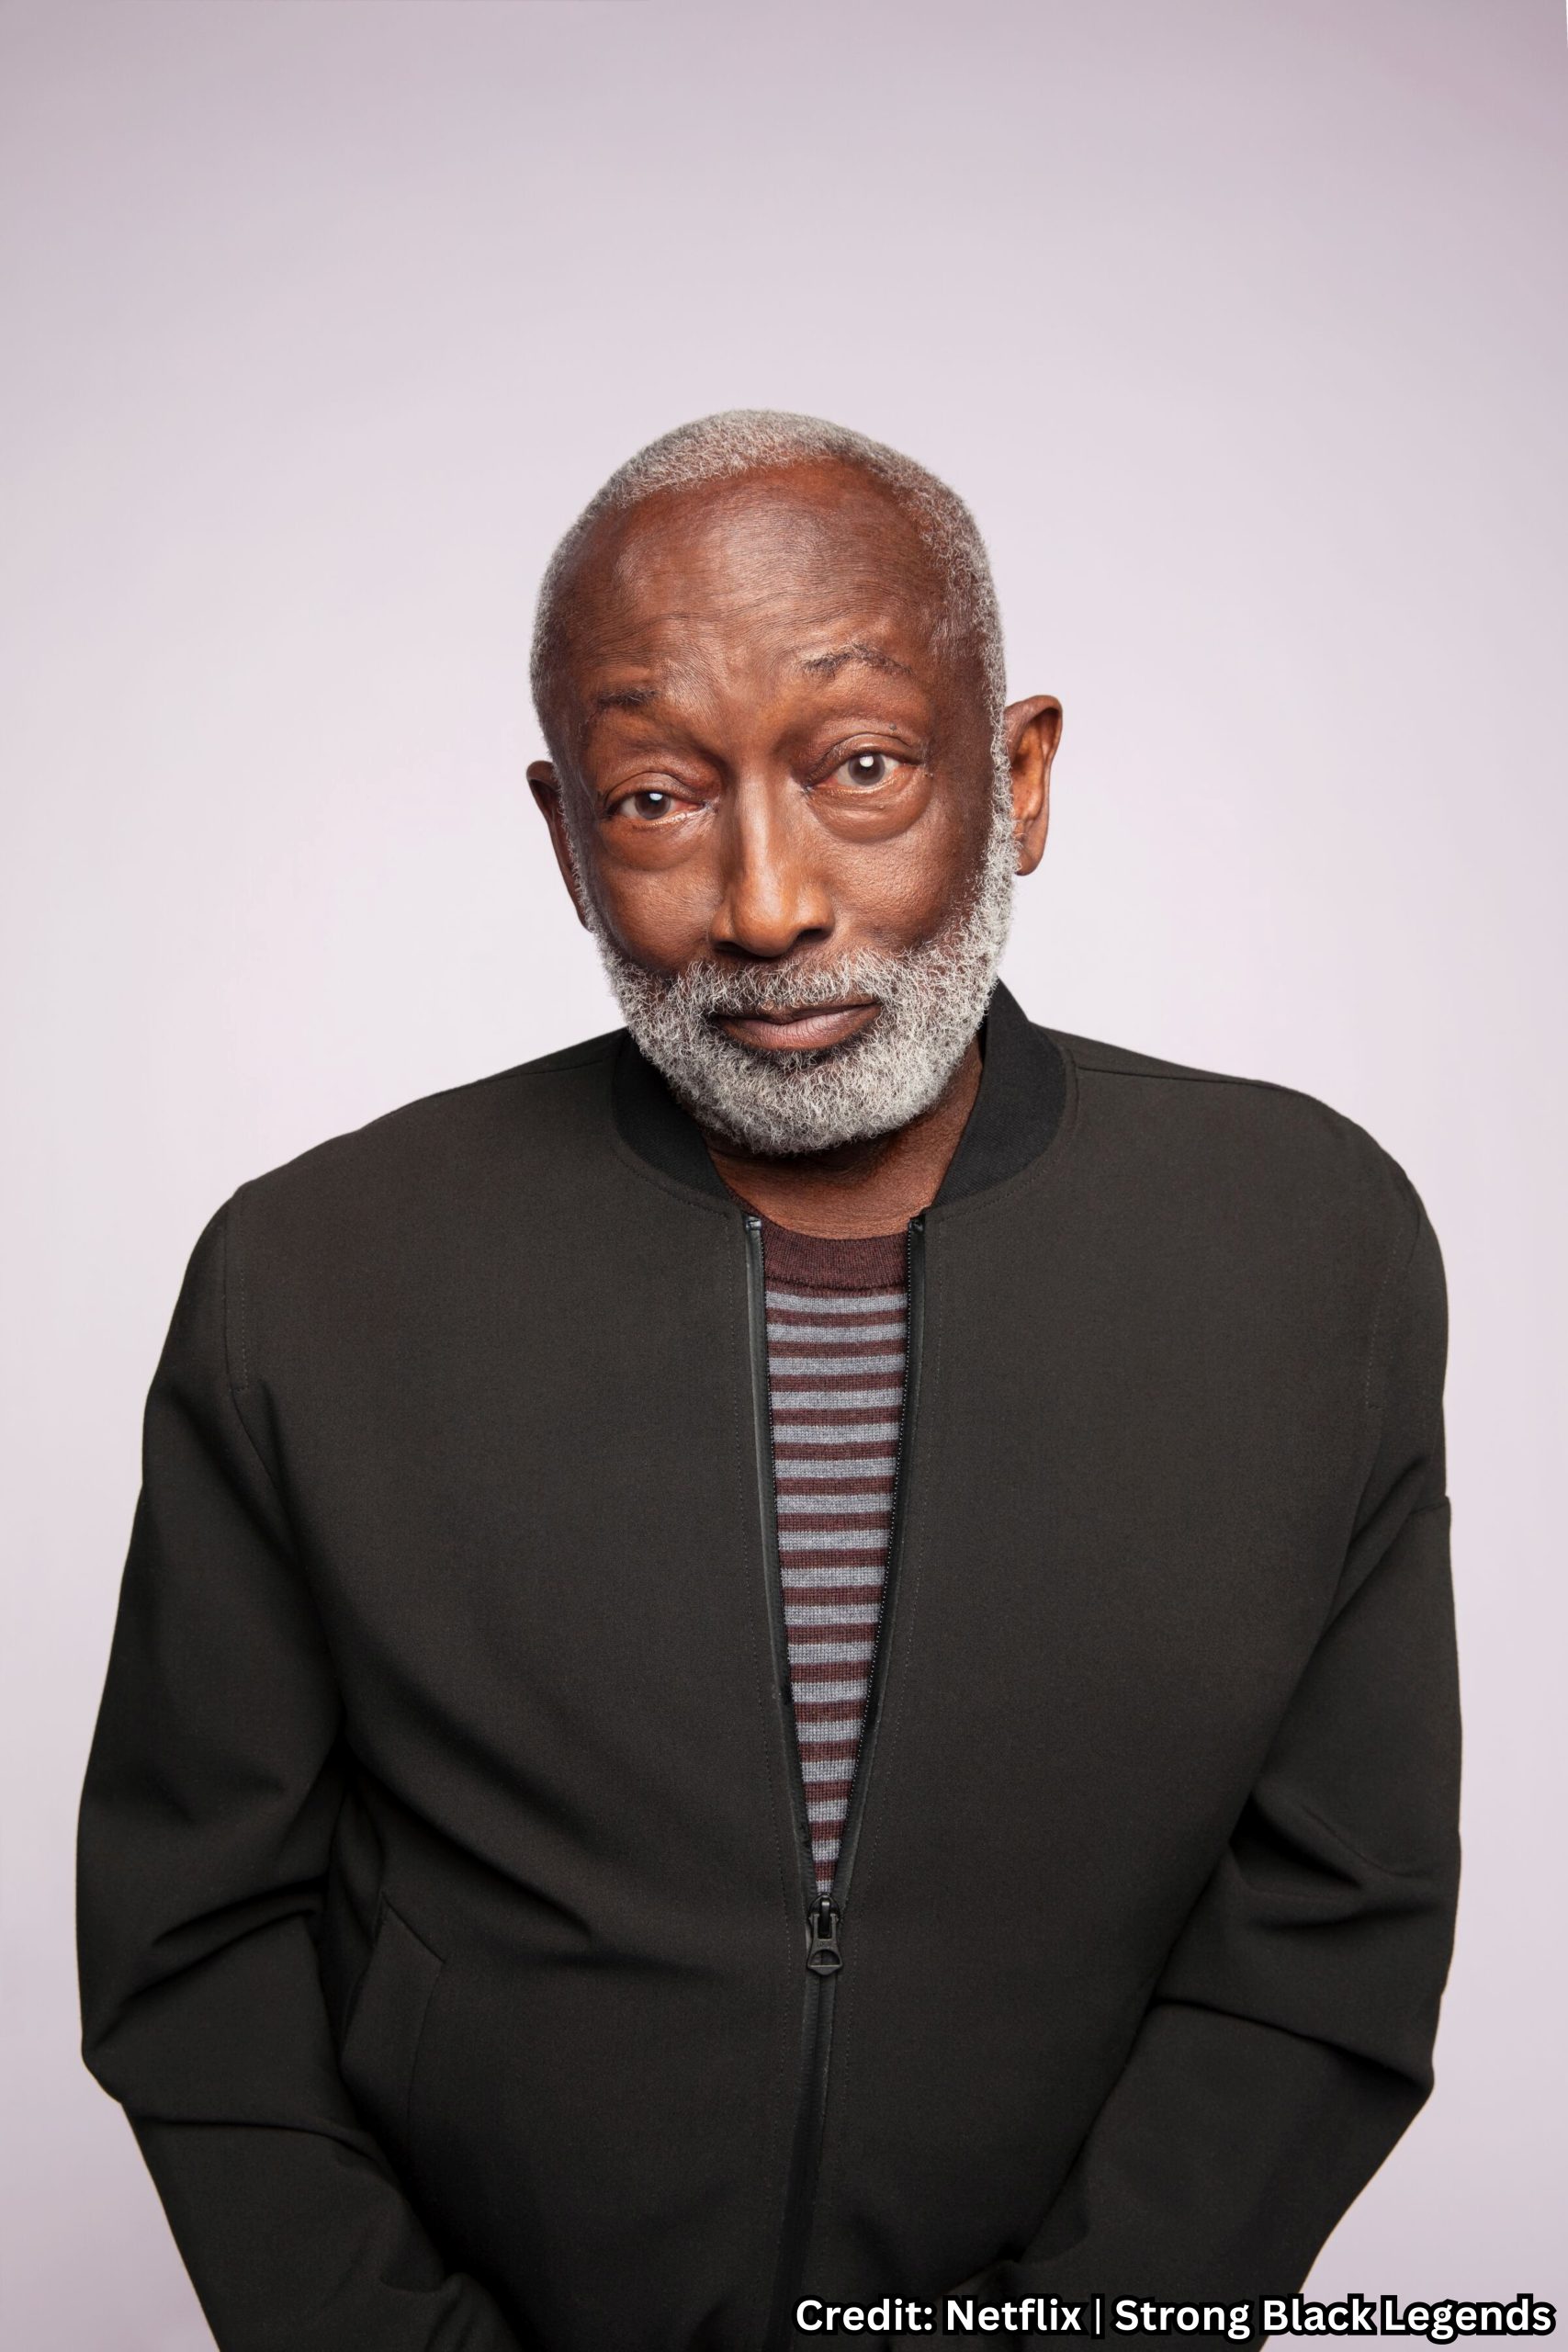 ACTOR GARRETT MORRIS CELEBRATES 87TH BIRTHDAY WITH STAR ON THE HOLLYWOOD WALK OF FAME